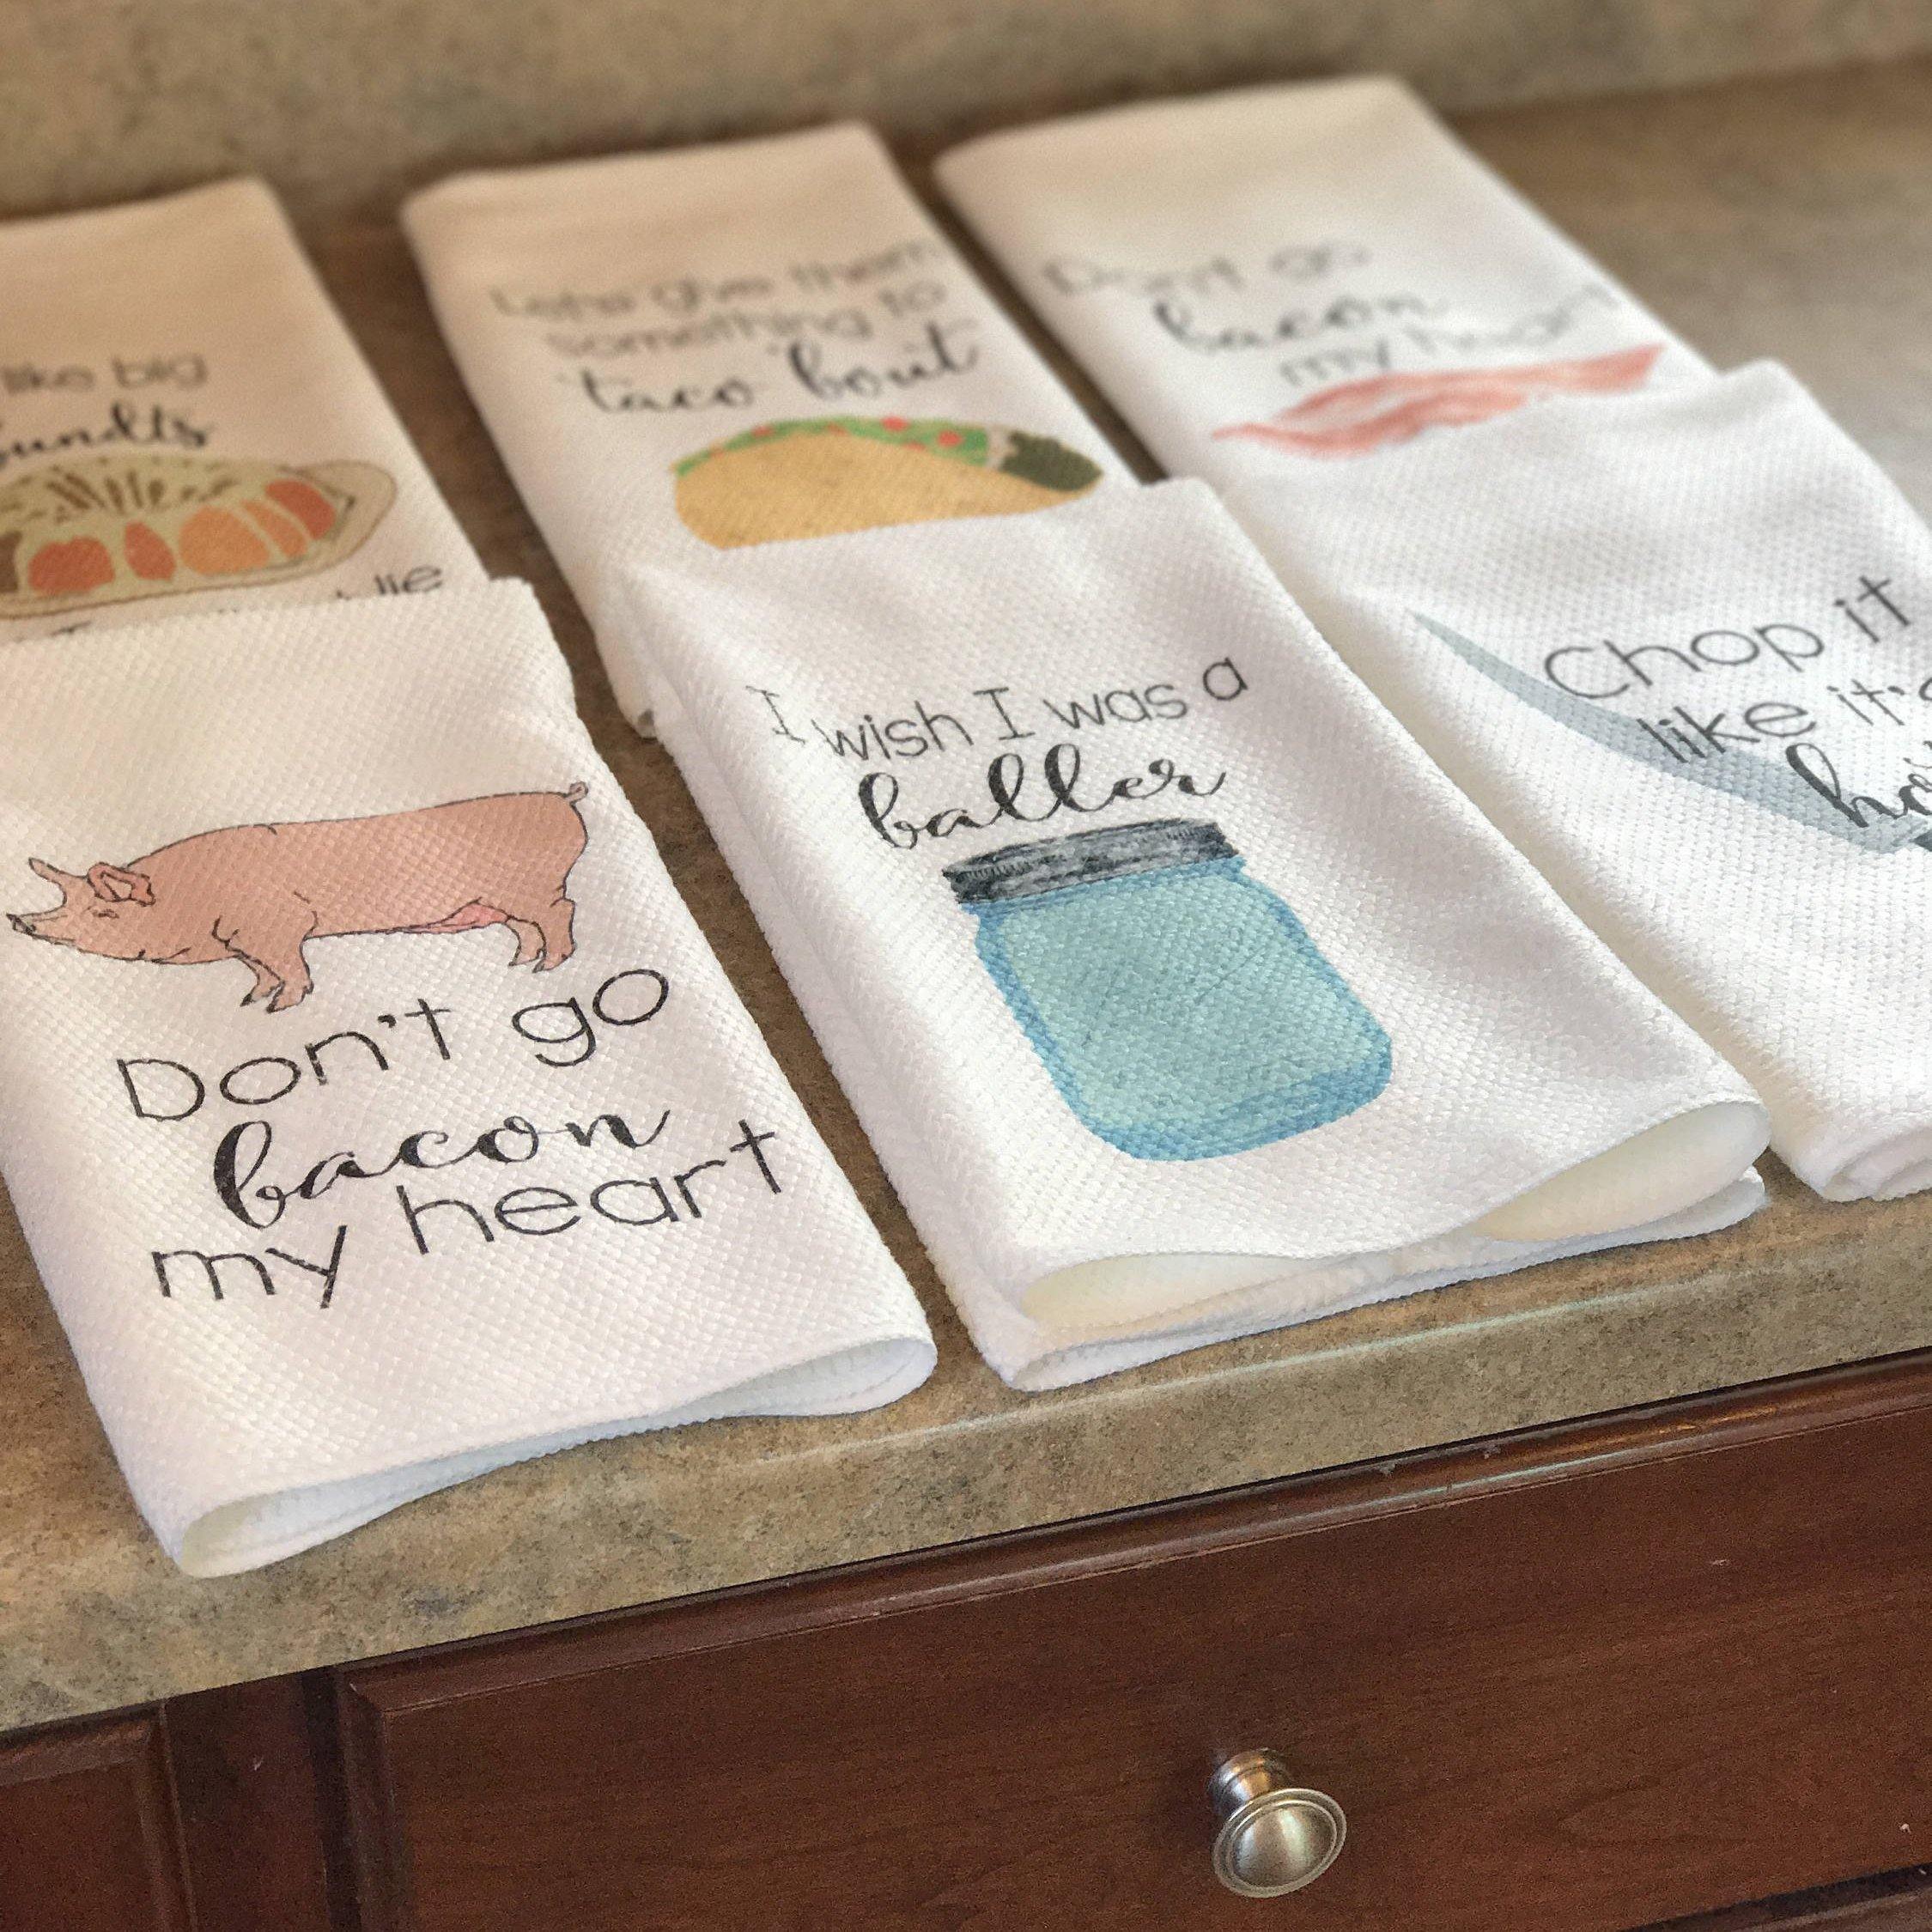 CintBllTer Funny Kitchen Towel, Funny Dish Towel, Funny Hand Towel, Fun Kitchen  Towels, Tea Towels Funny, with Sayings, Decorative, Cute, Sarcastic, Decor,  